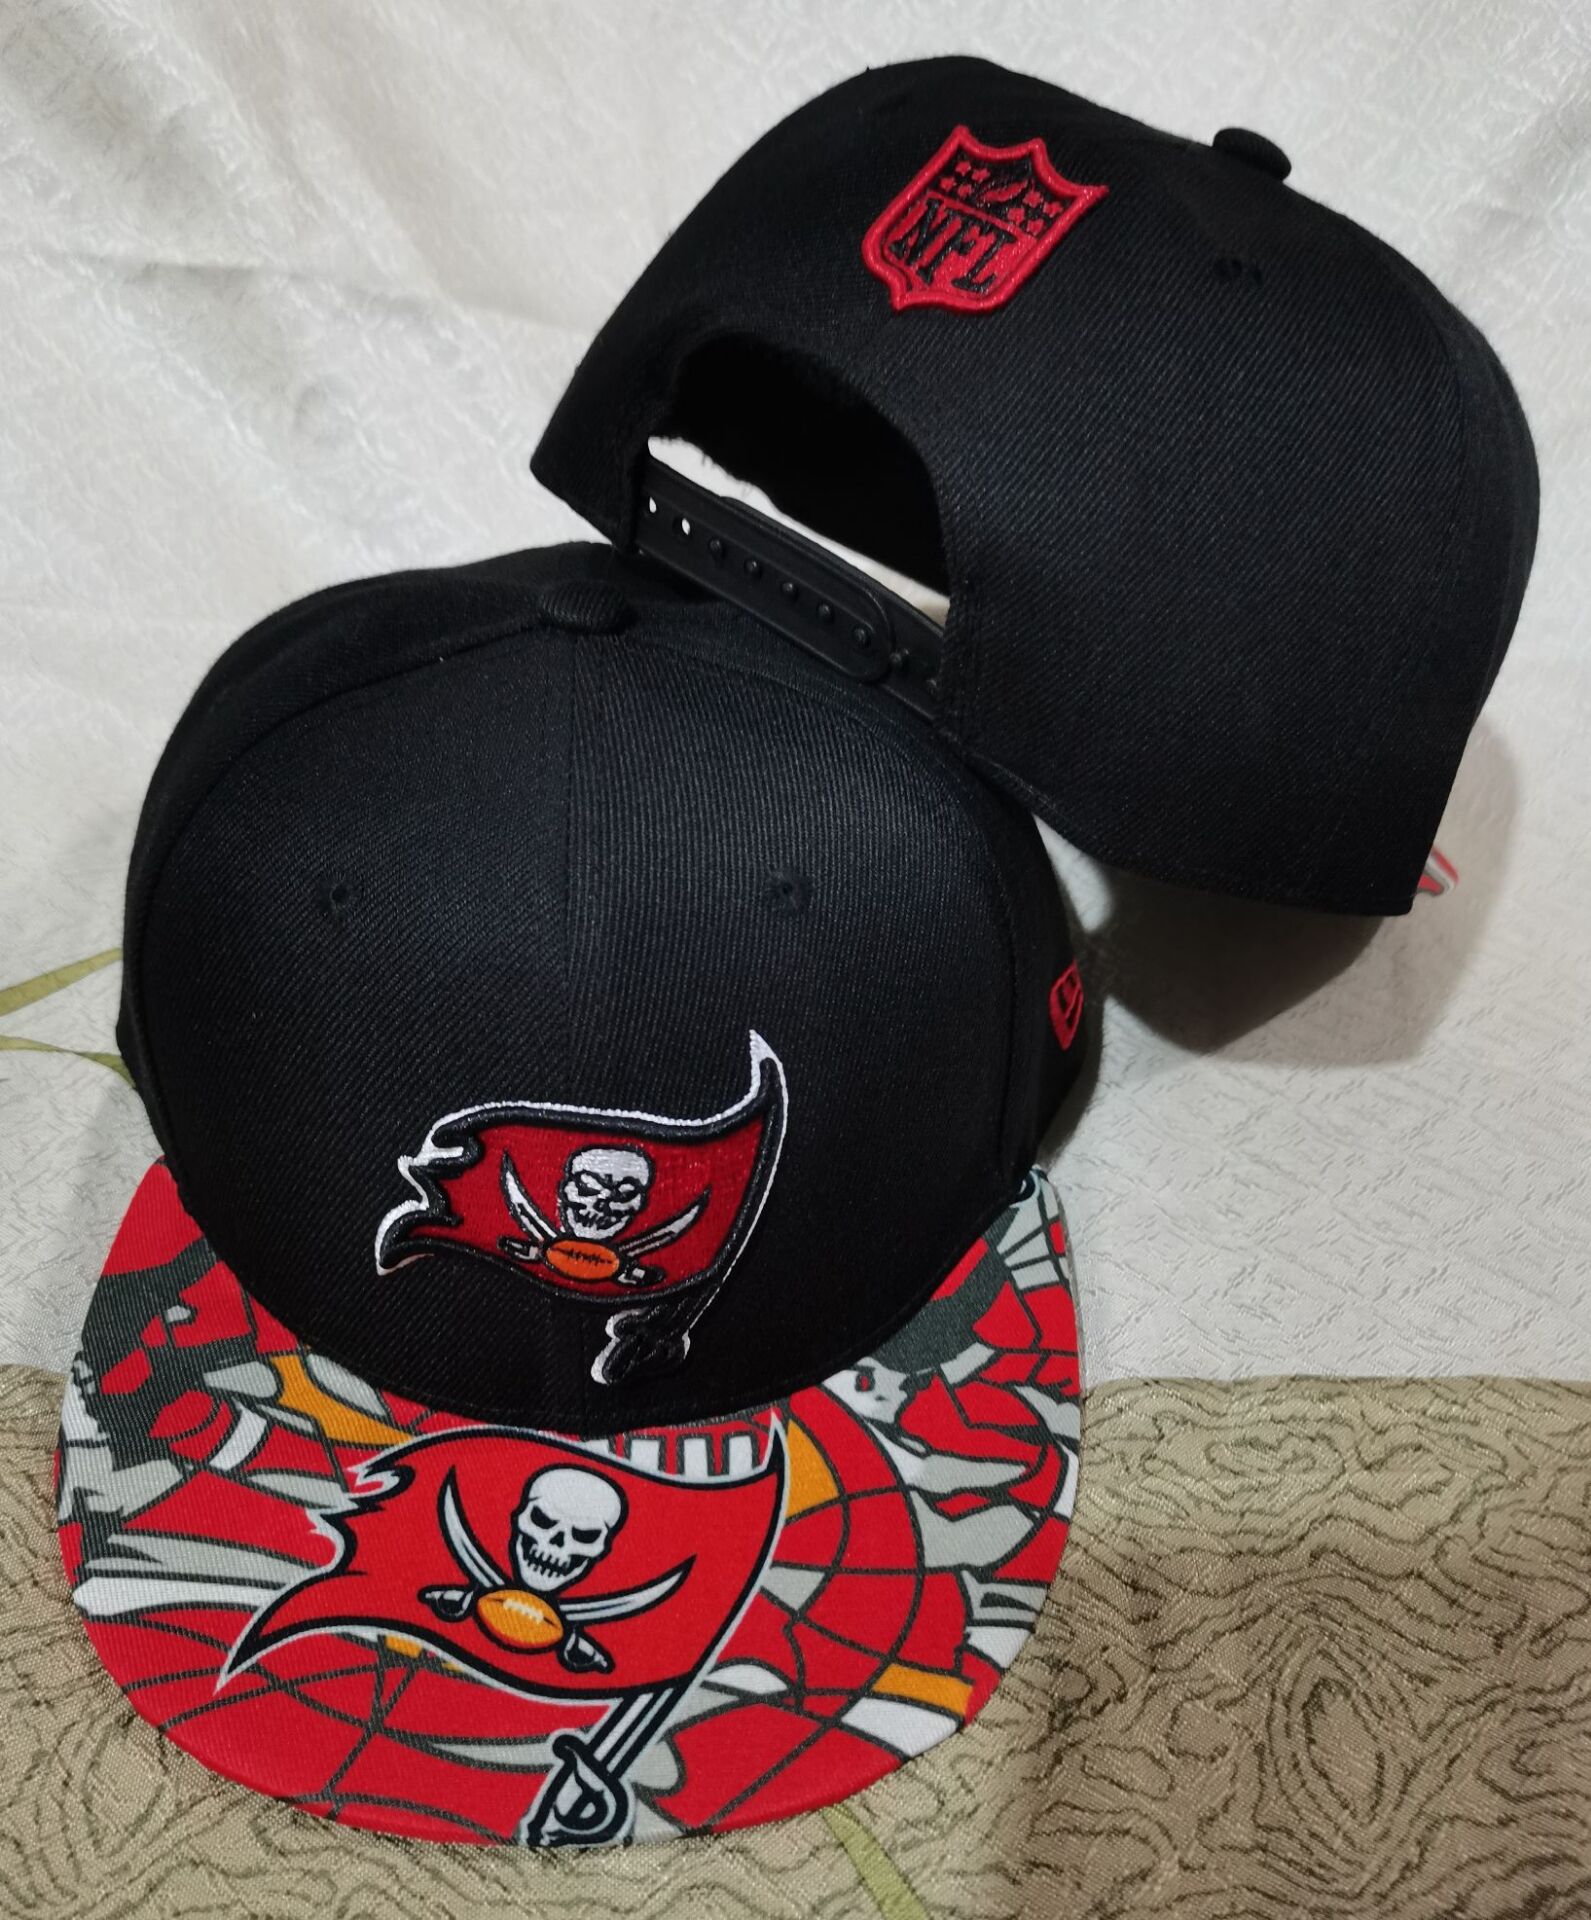 2022 NFL Tampa Bay Buccaneers #1 hat GSMY->nfl hats->Sports Caps